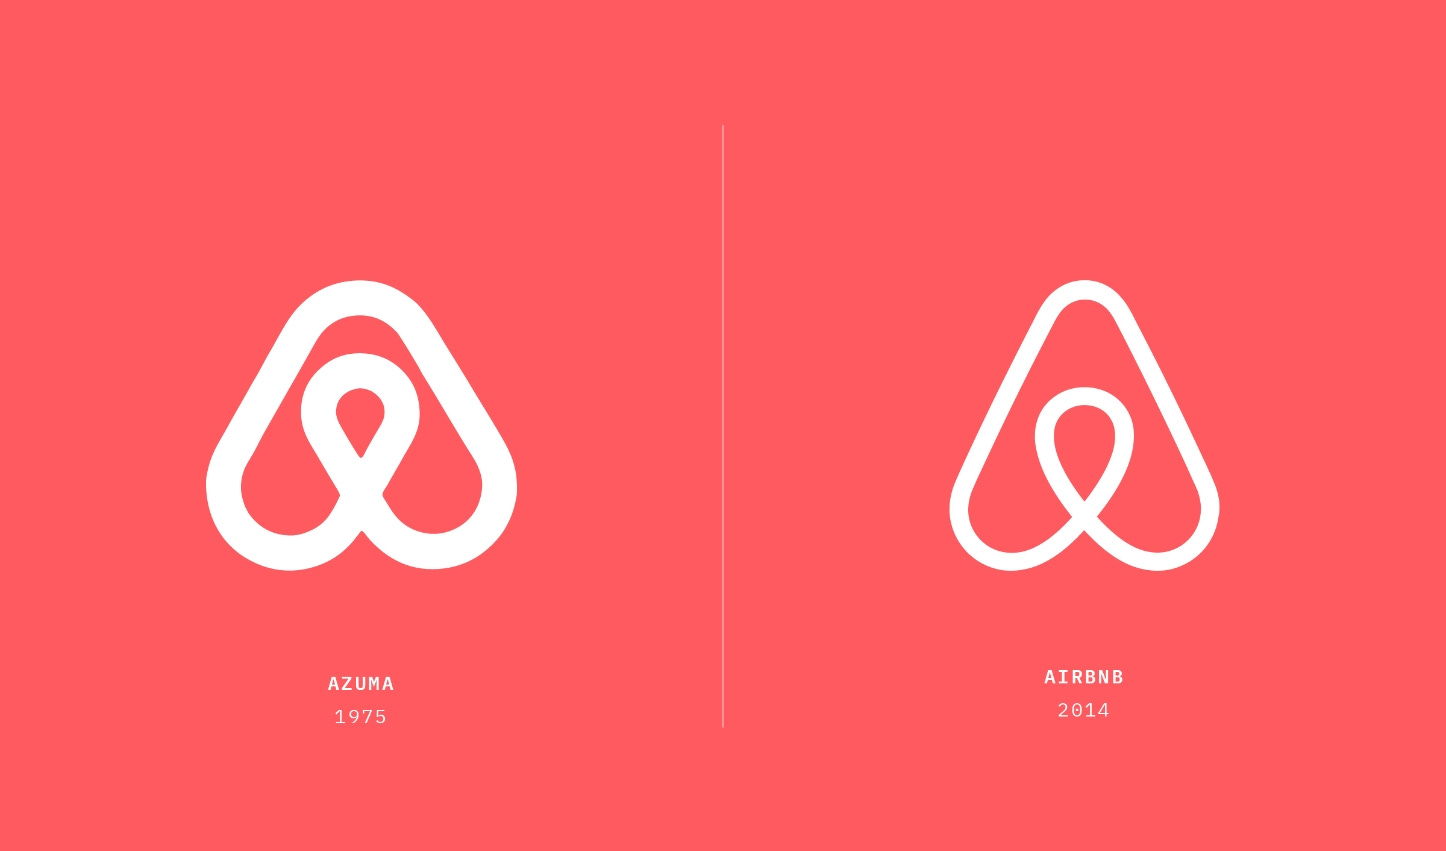 Two logos (Azuma and Airbnb) that were designed 40 years apart but look exactly the same